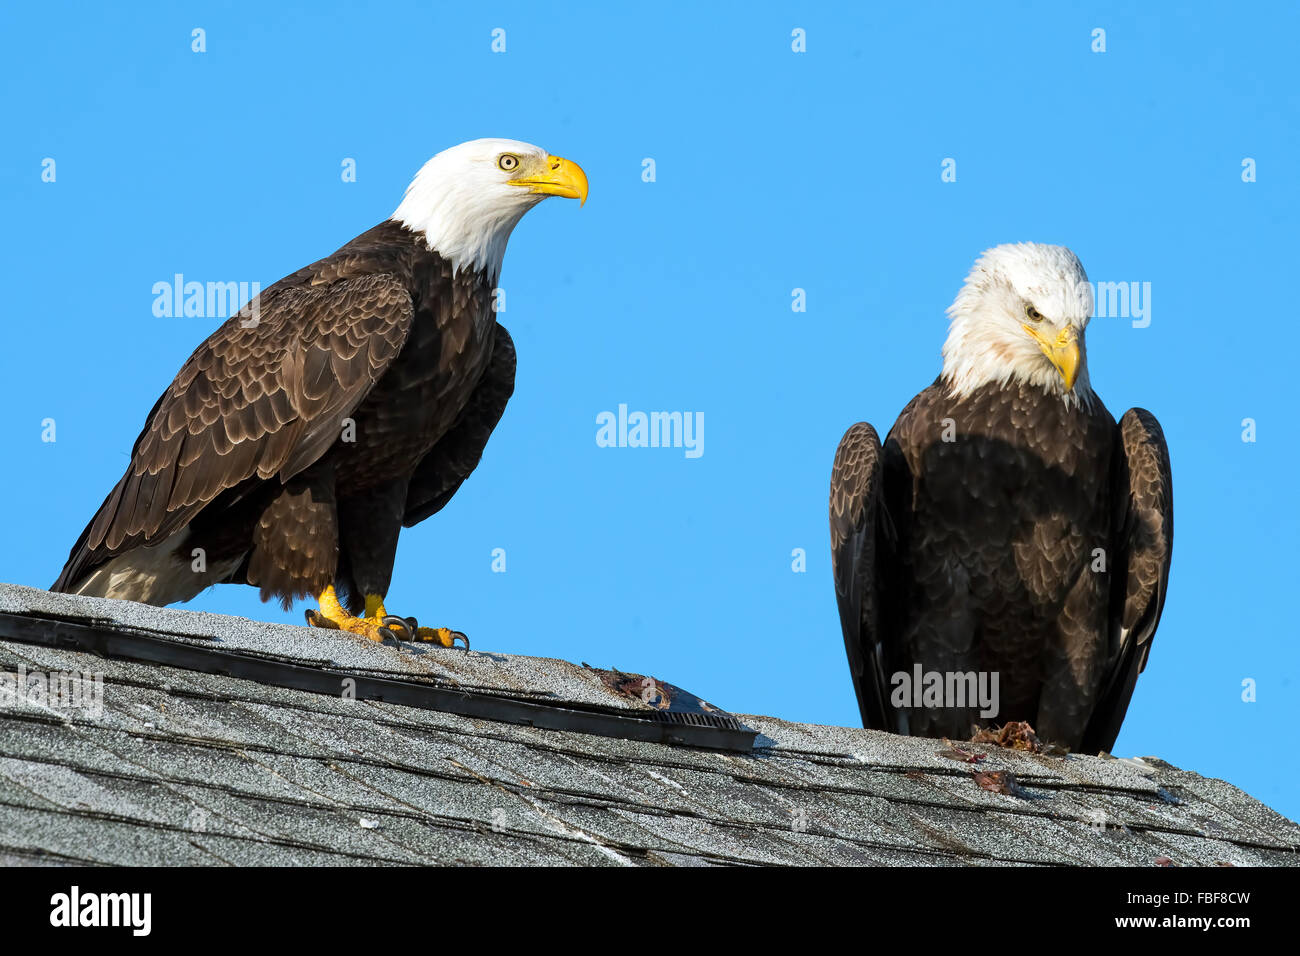 Pair of Bald Eagles sitting on a roof Stock Photo